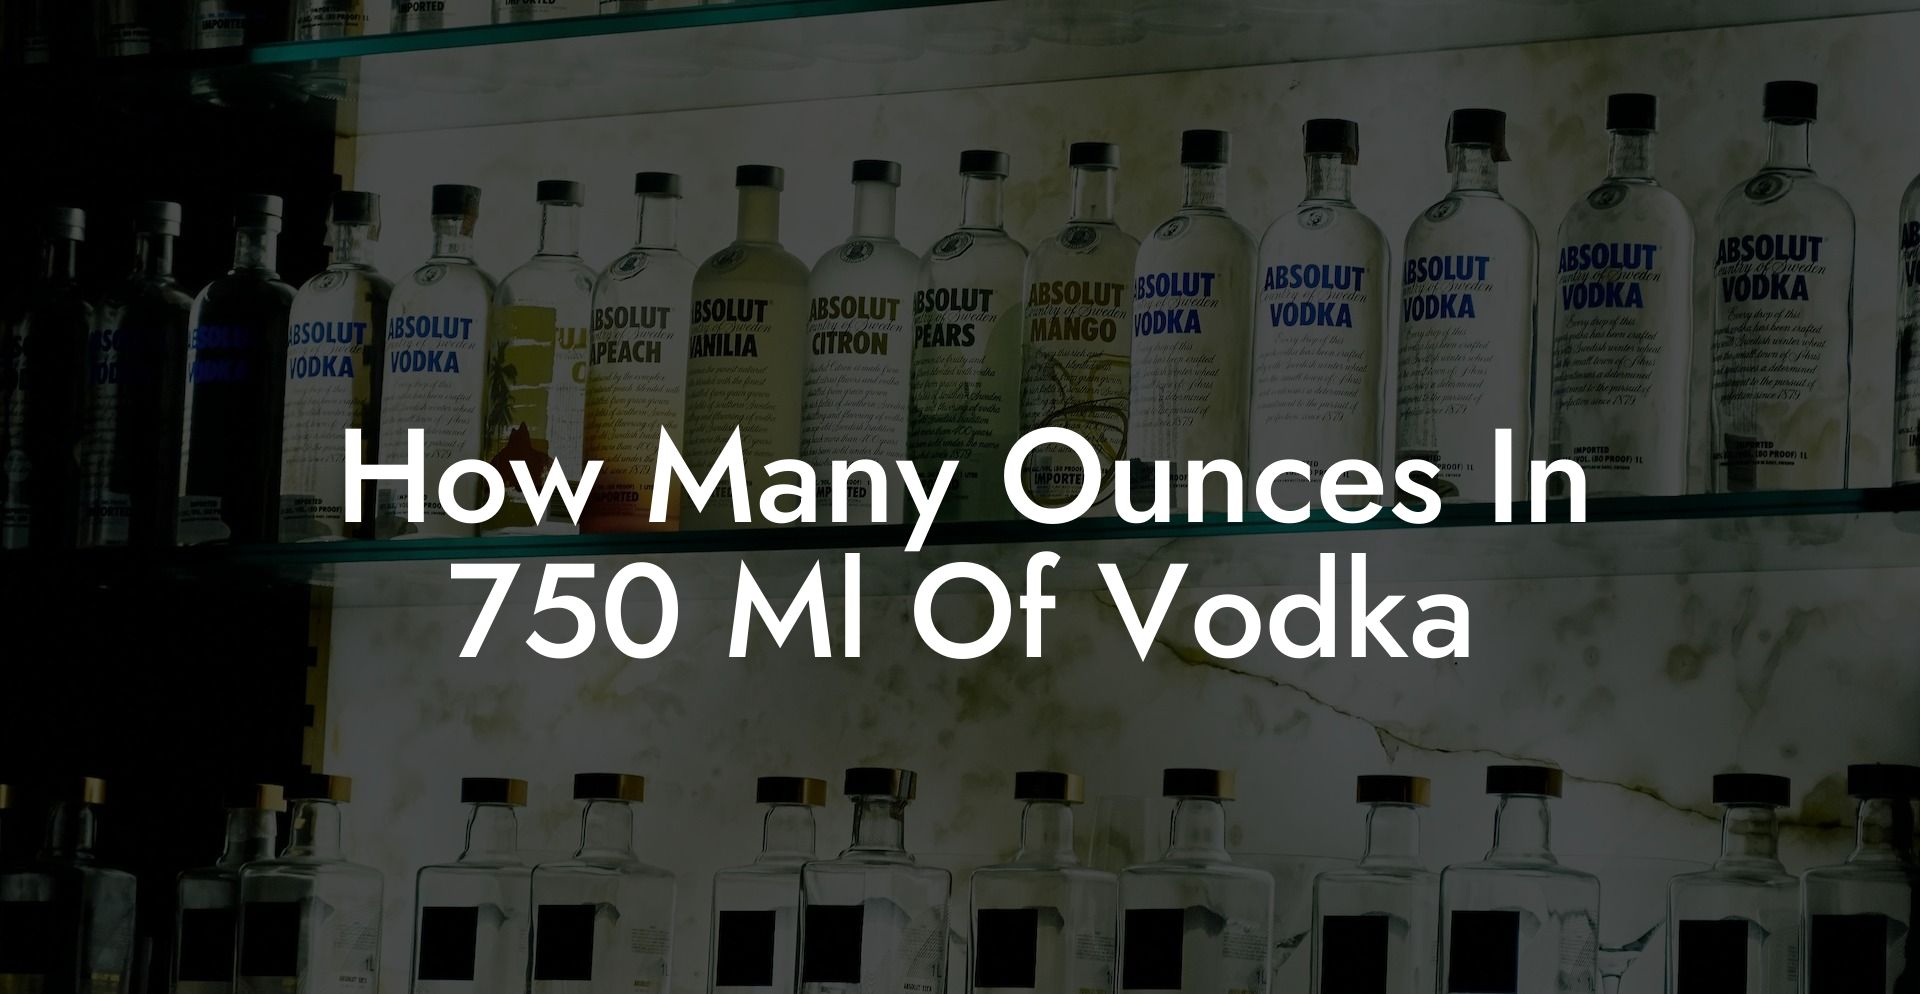 How Many Ounces In 750 Ml Of Vodka